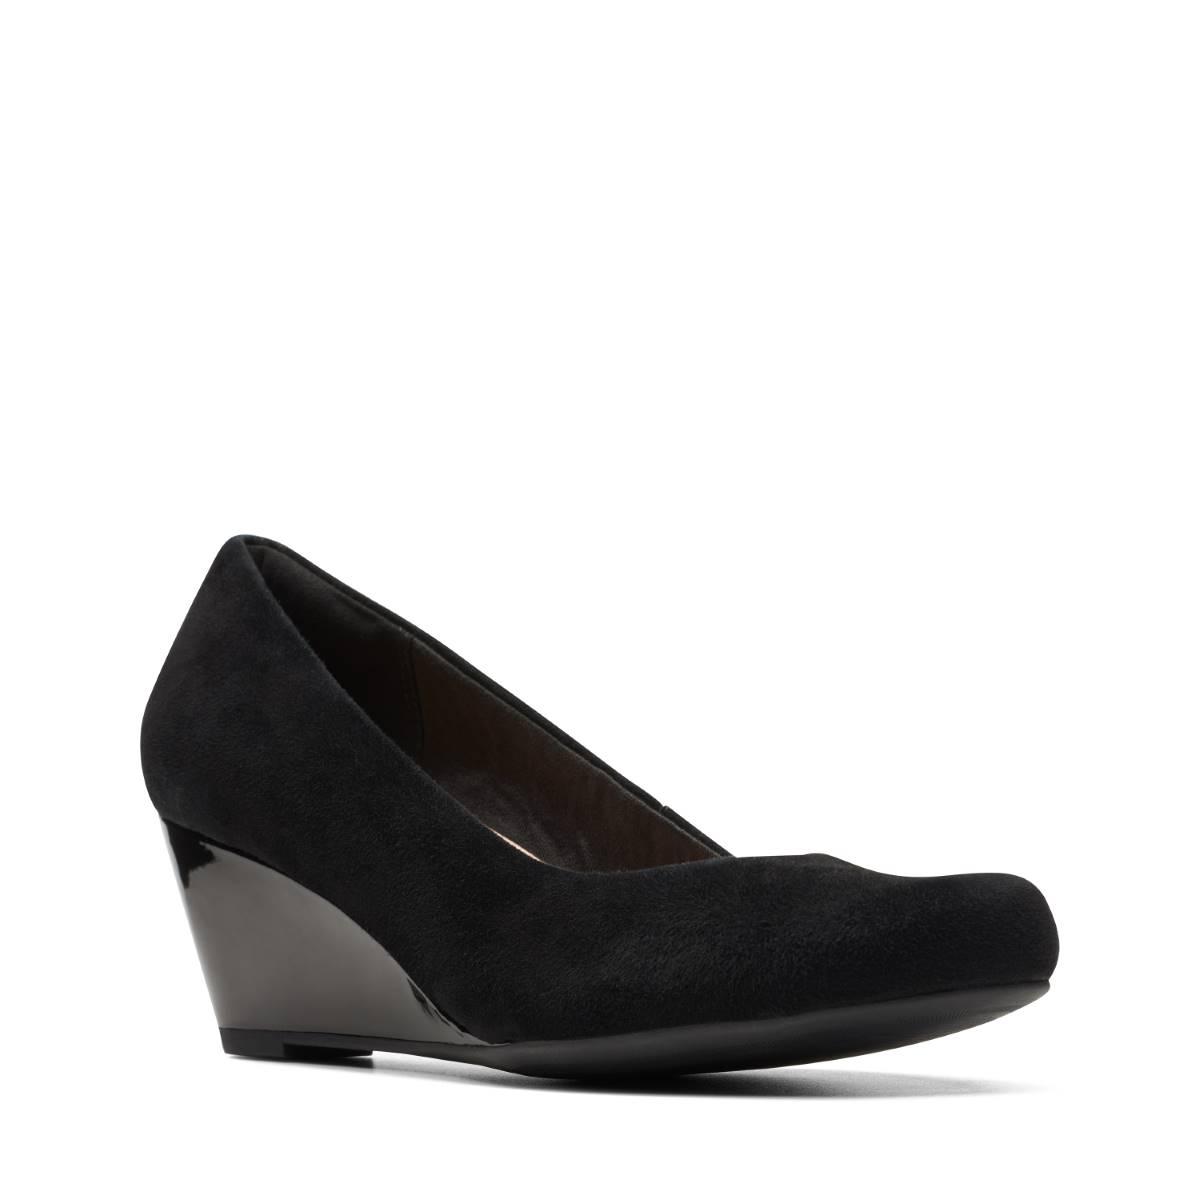 Clarks Flores Tulip Black suede Womens Wedge Shoes 7515-44D in a Plain Leather in Size 6.5